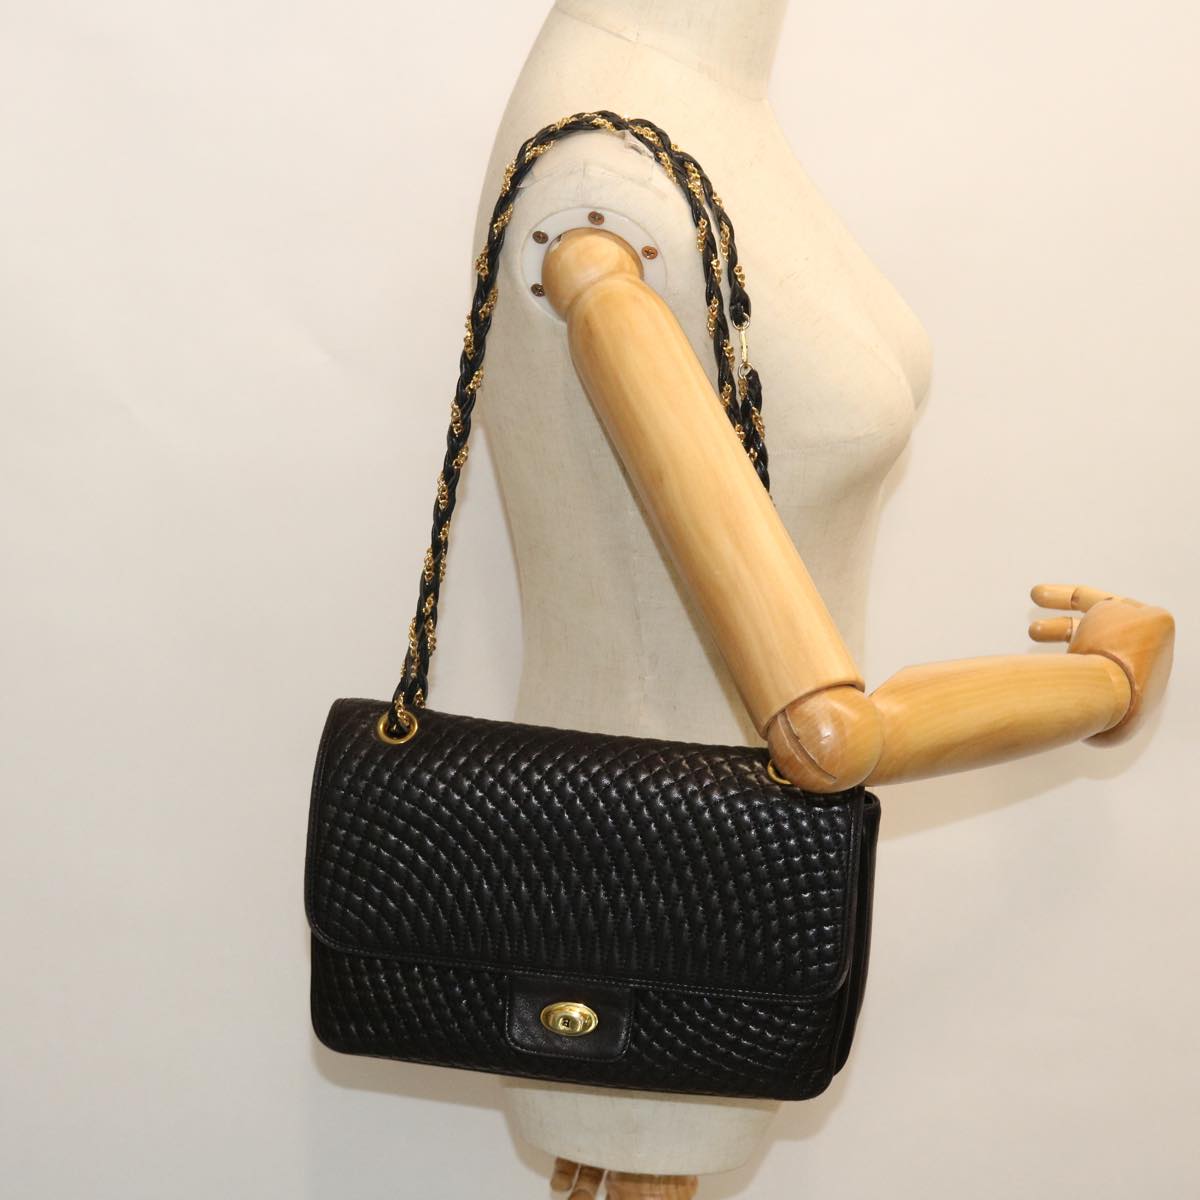 BALLY Quilted Shoulder Bag Leather Black Auth bs8024